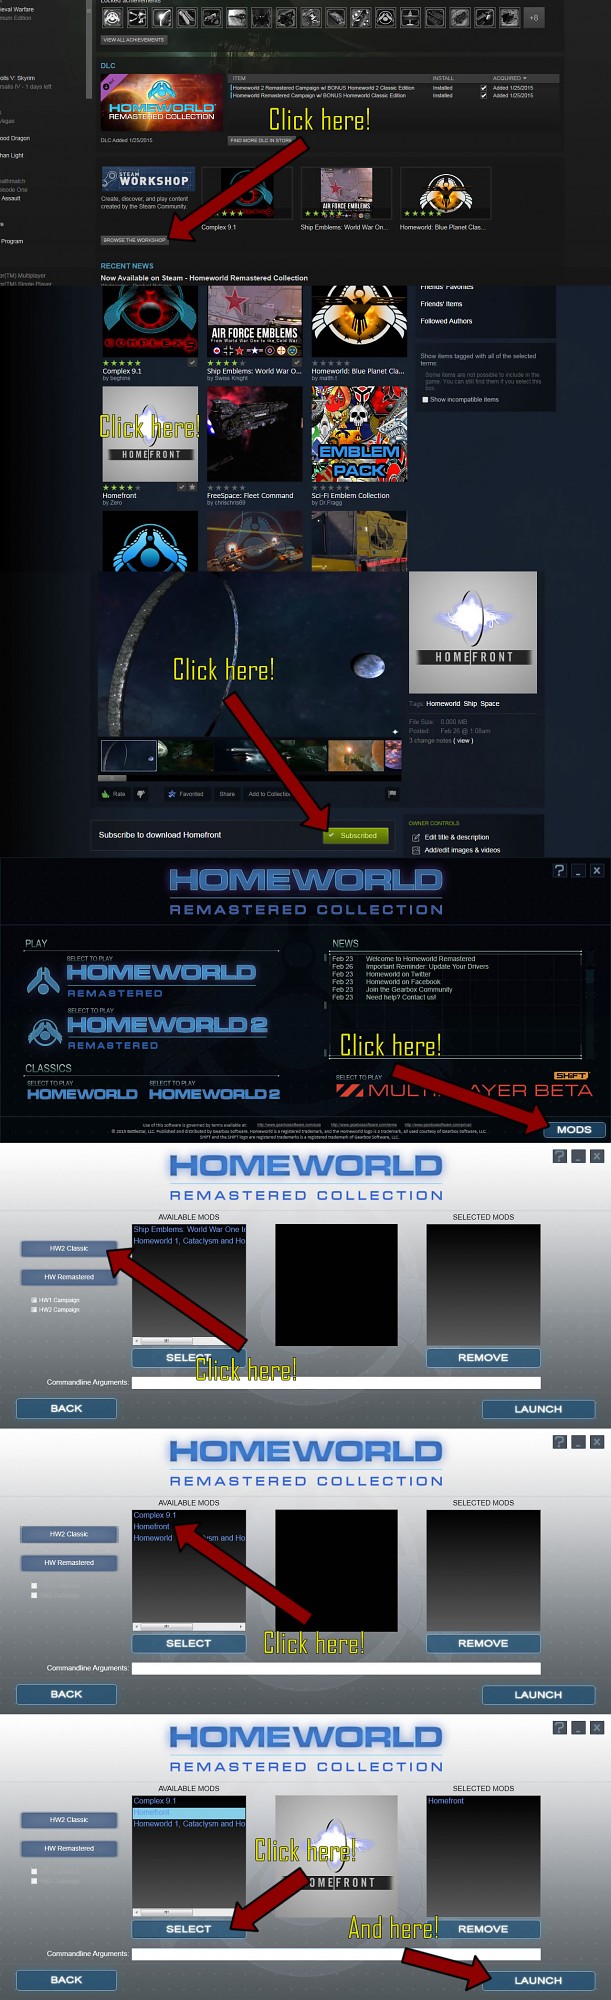 where does the steam workshop download to